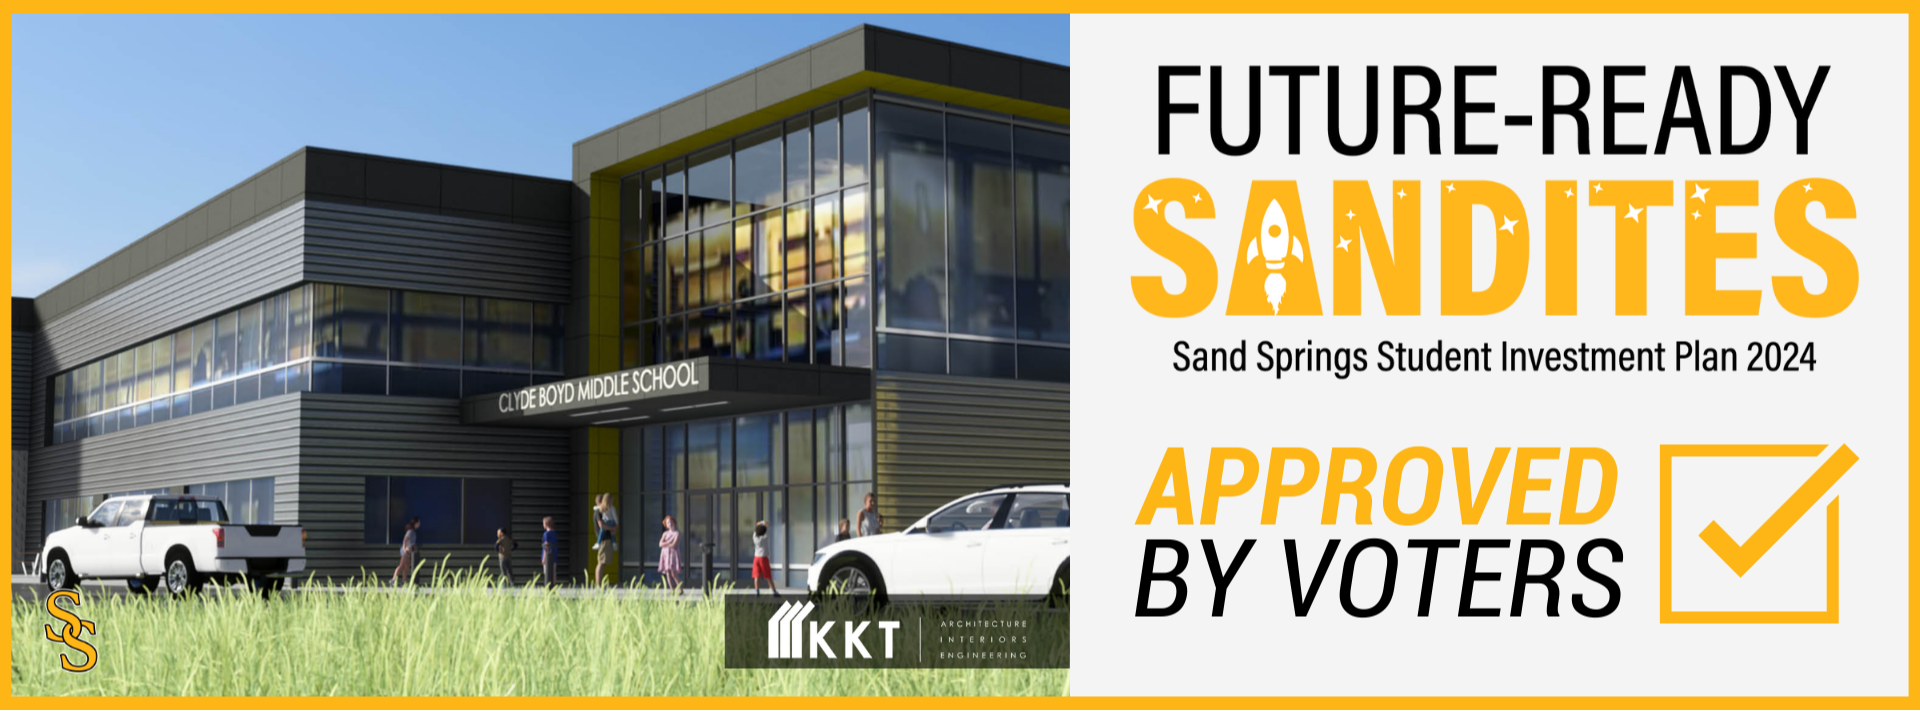 Future Ready Sandites Sand Springs Student Investment Plan 2024 Approved by Voters